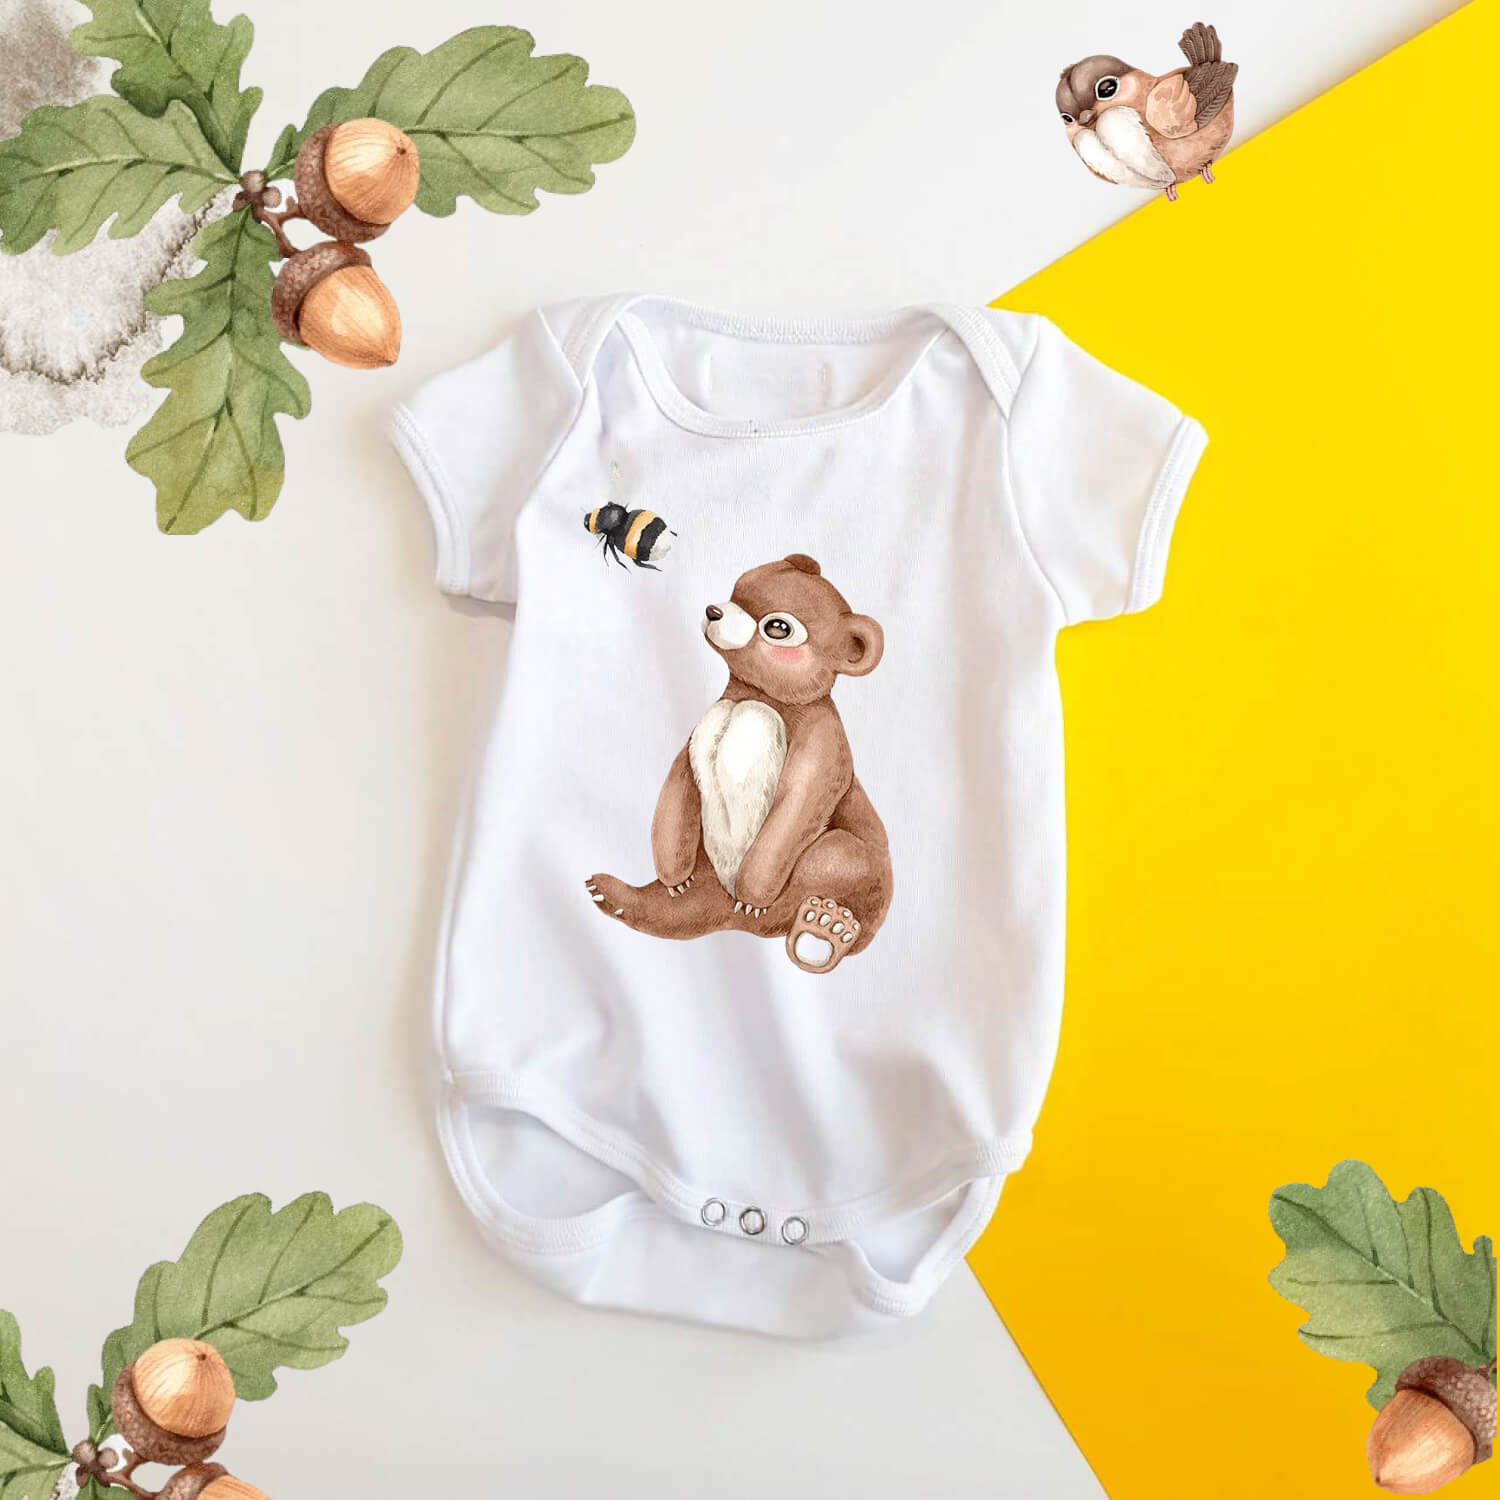 Children's bodysuit with watercolor drawings of a teddy bear and a bee.